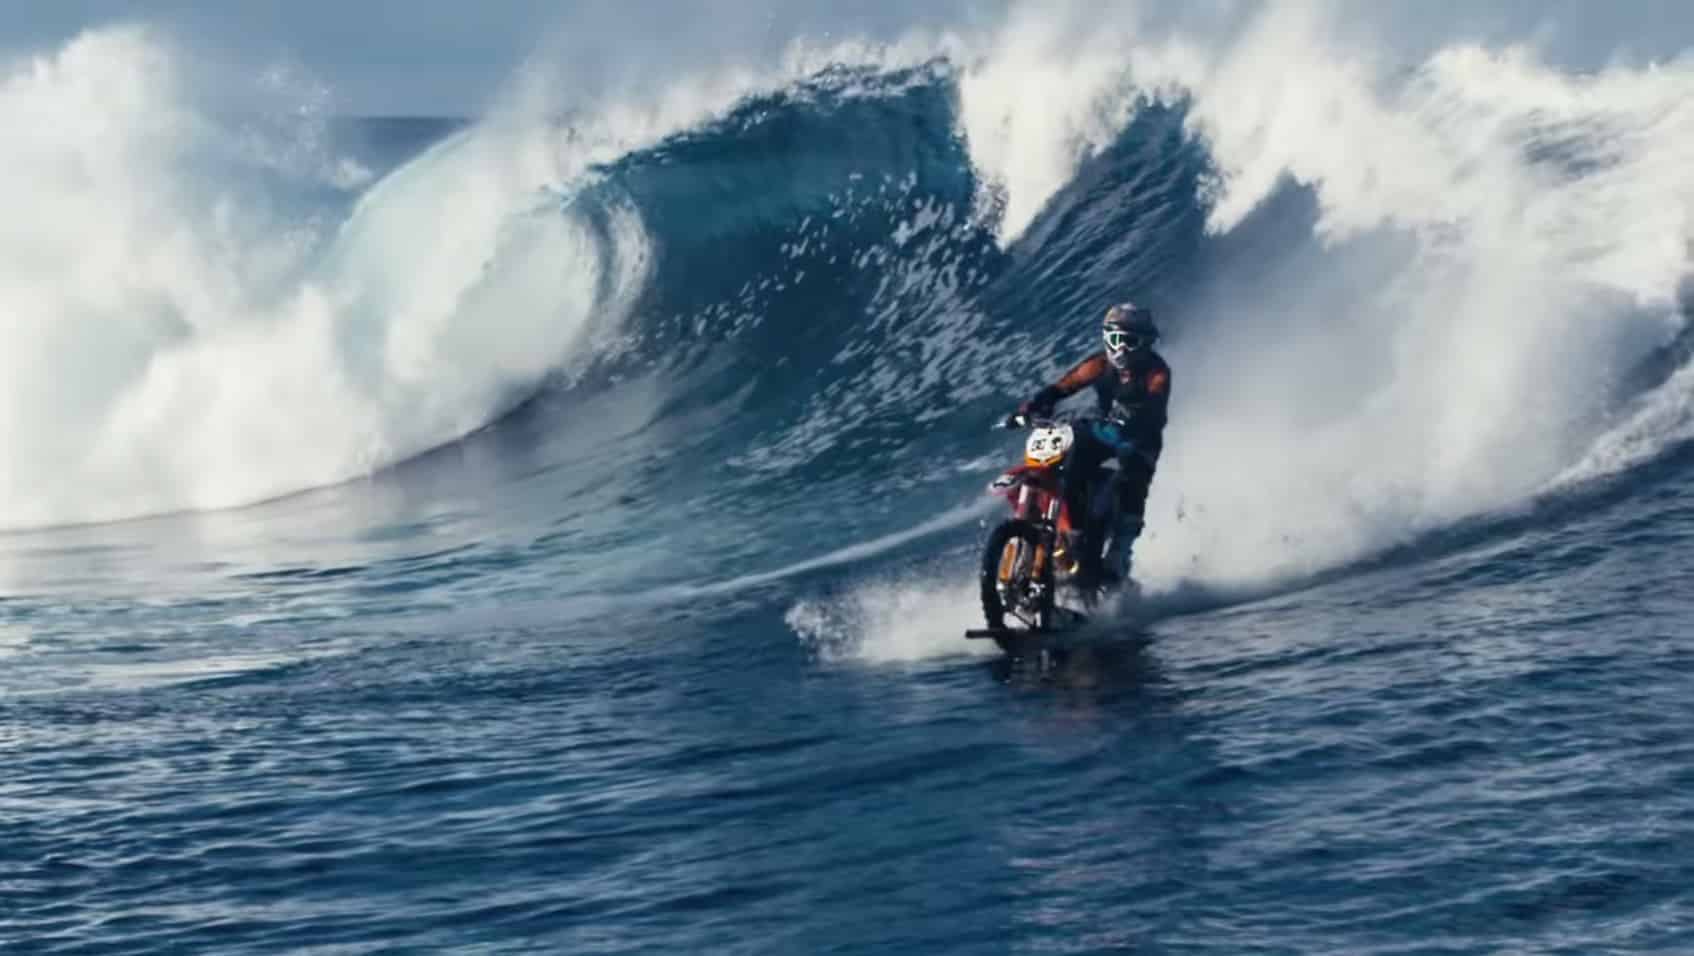 A man RIDEs a motorcycle through a large wave in Robbie Maddison's "Pipe Dream.